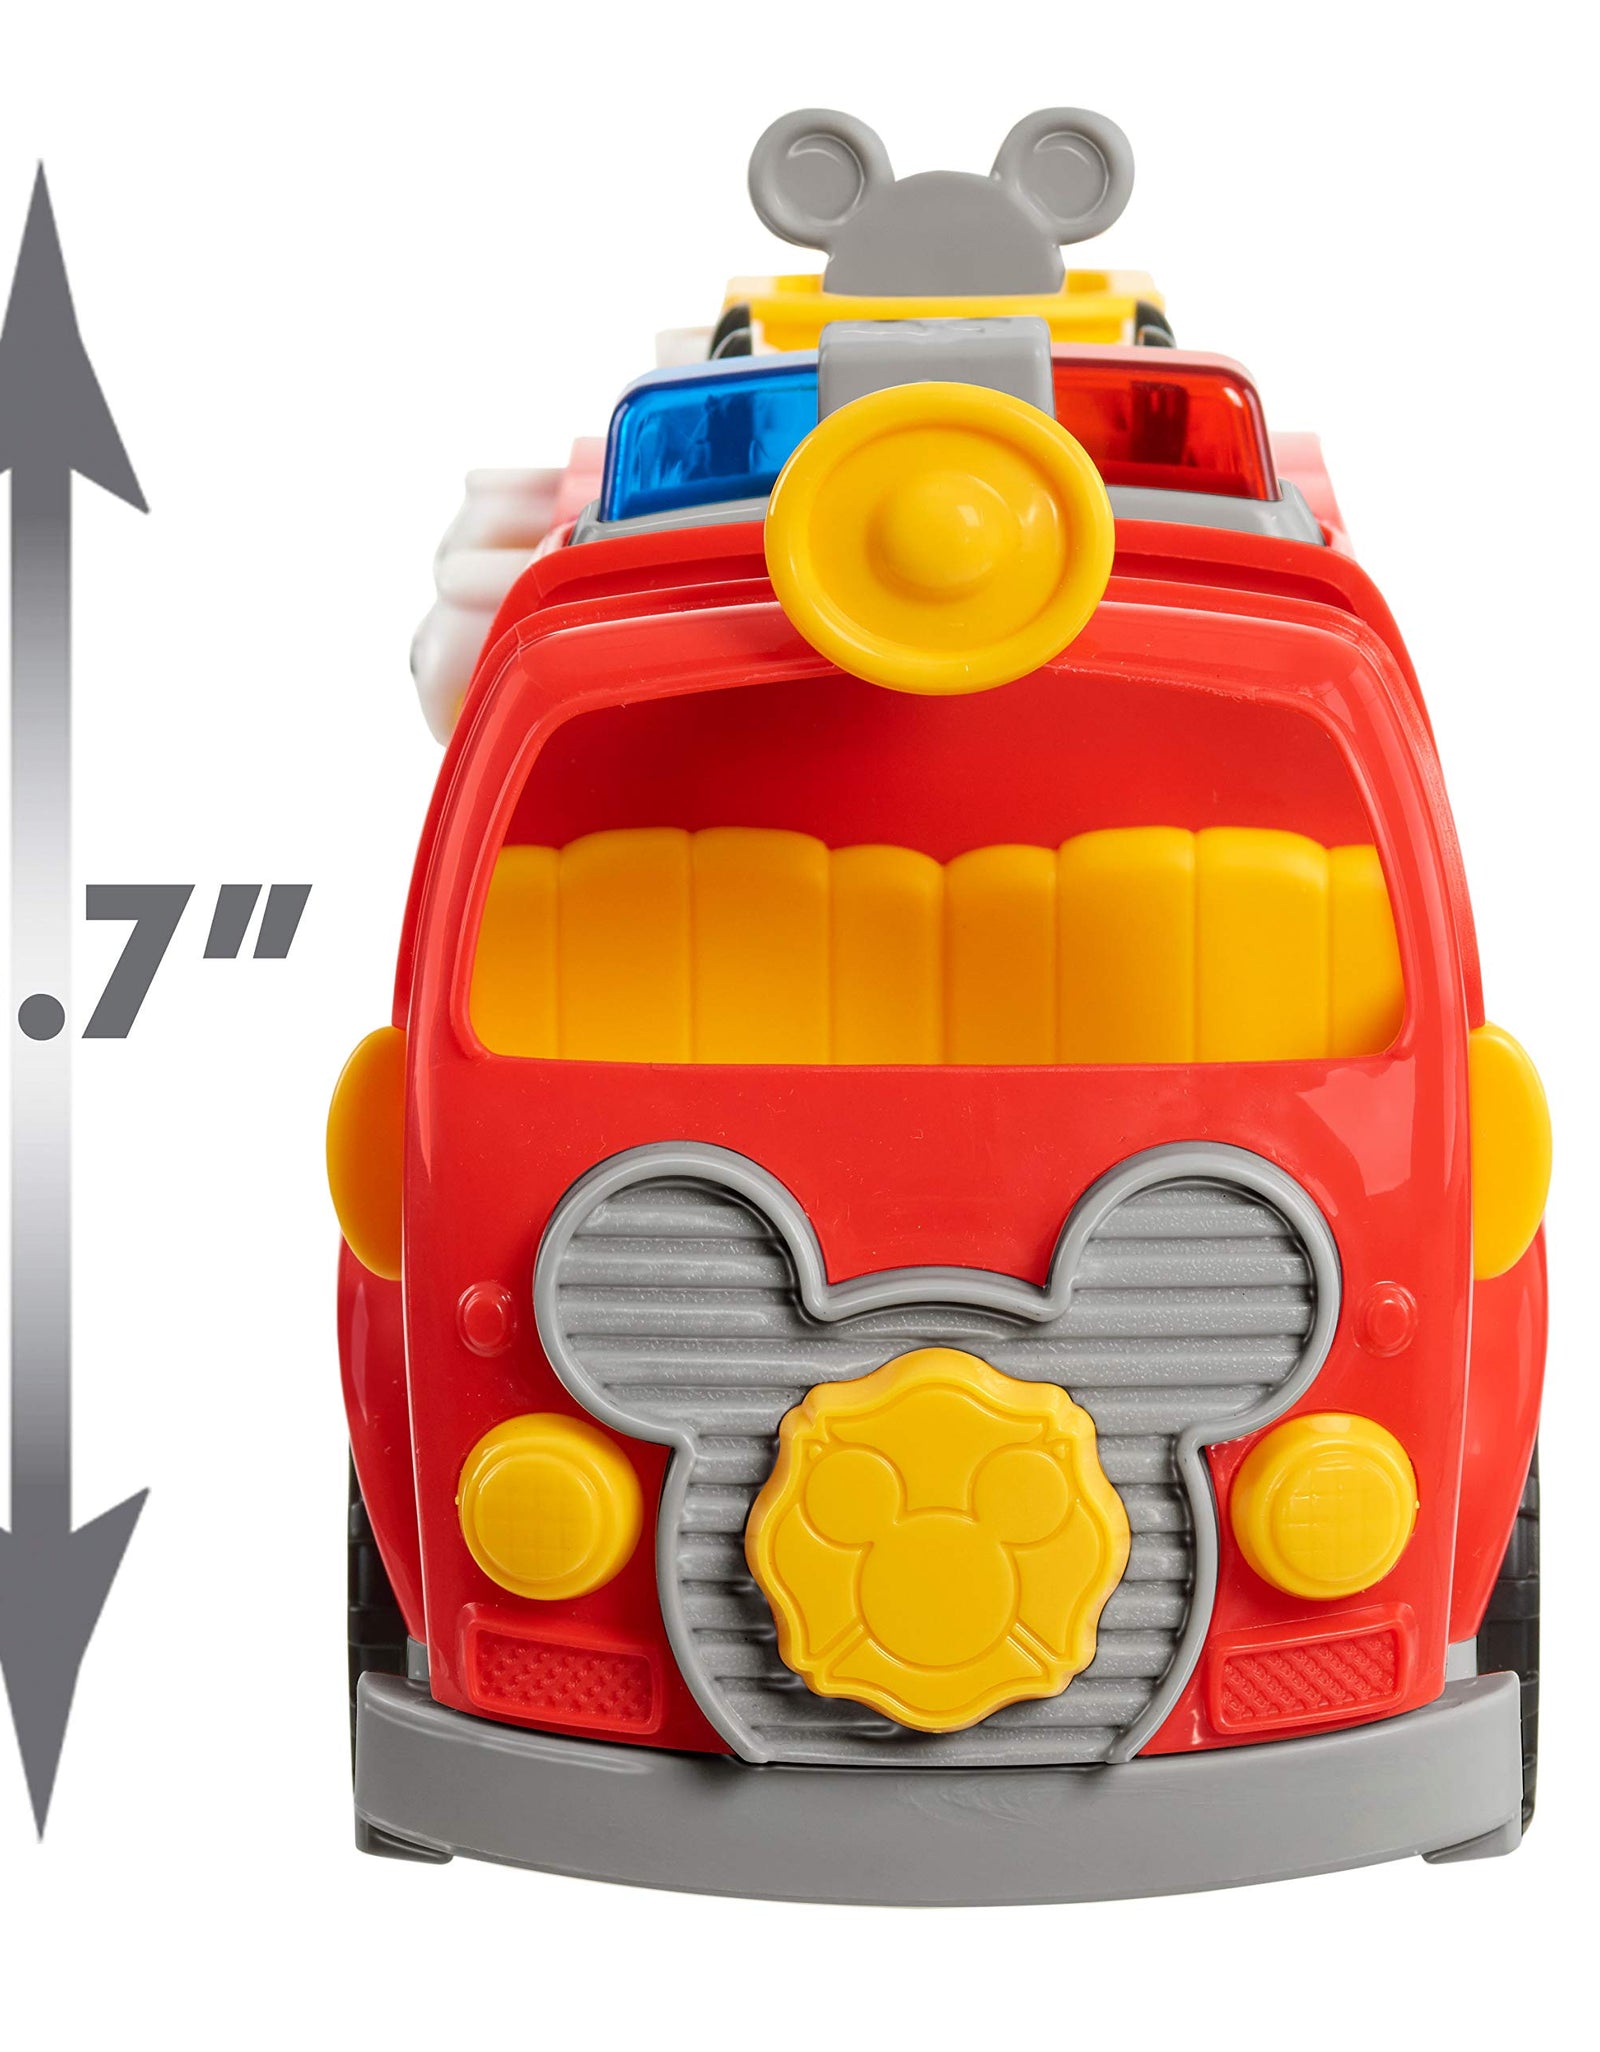 Disney’s Mickey Mouse Mickey’s Fire Engine, Fire Truck Toy with Lights and Sounds, by Just Play